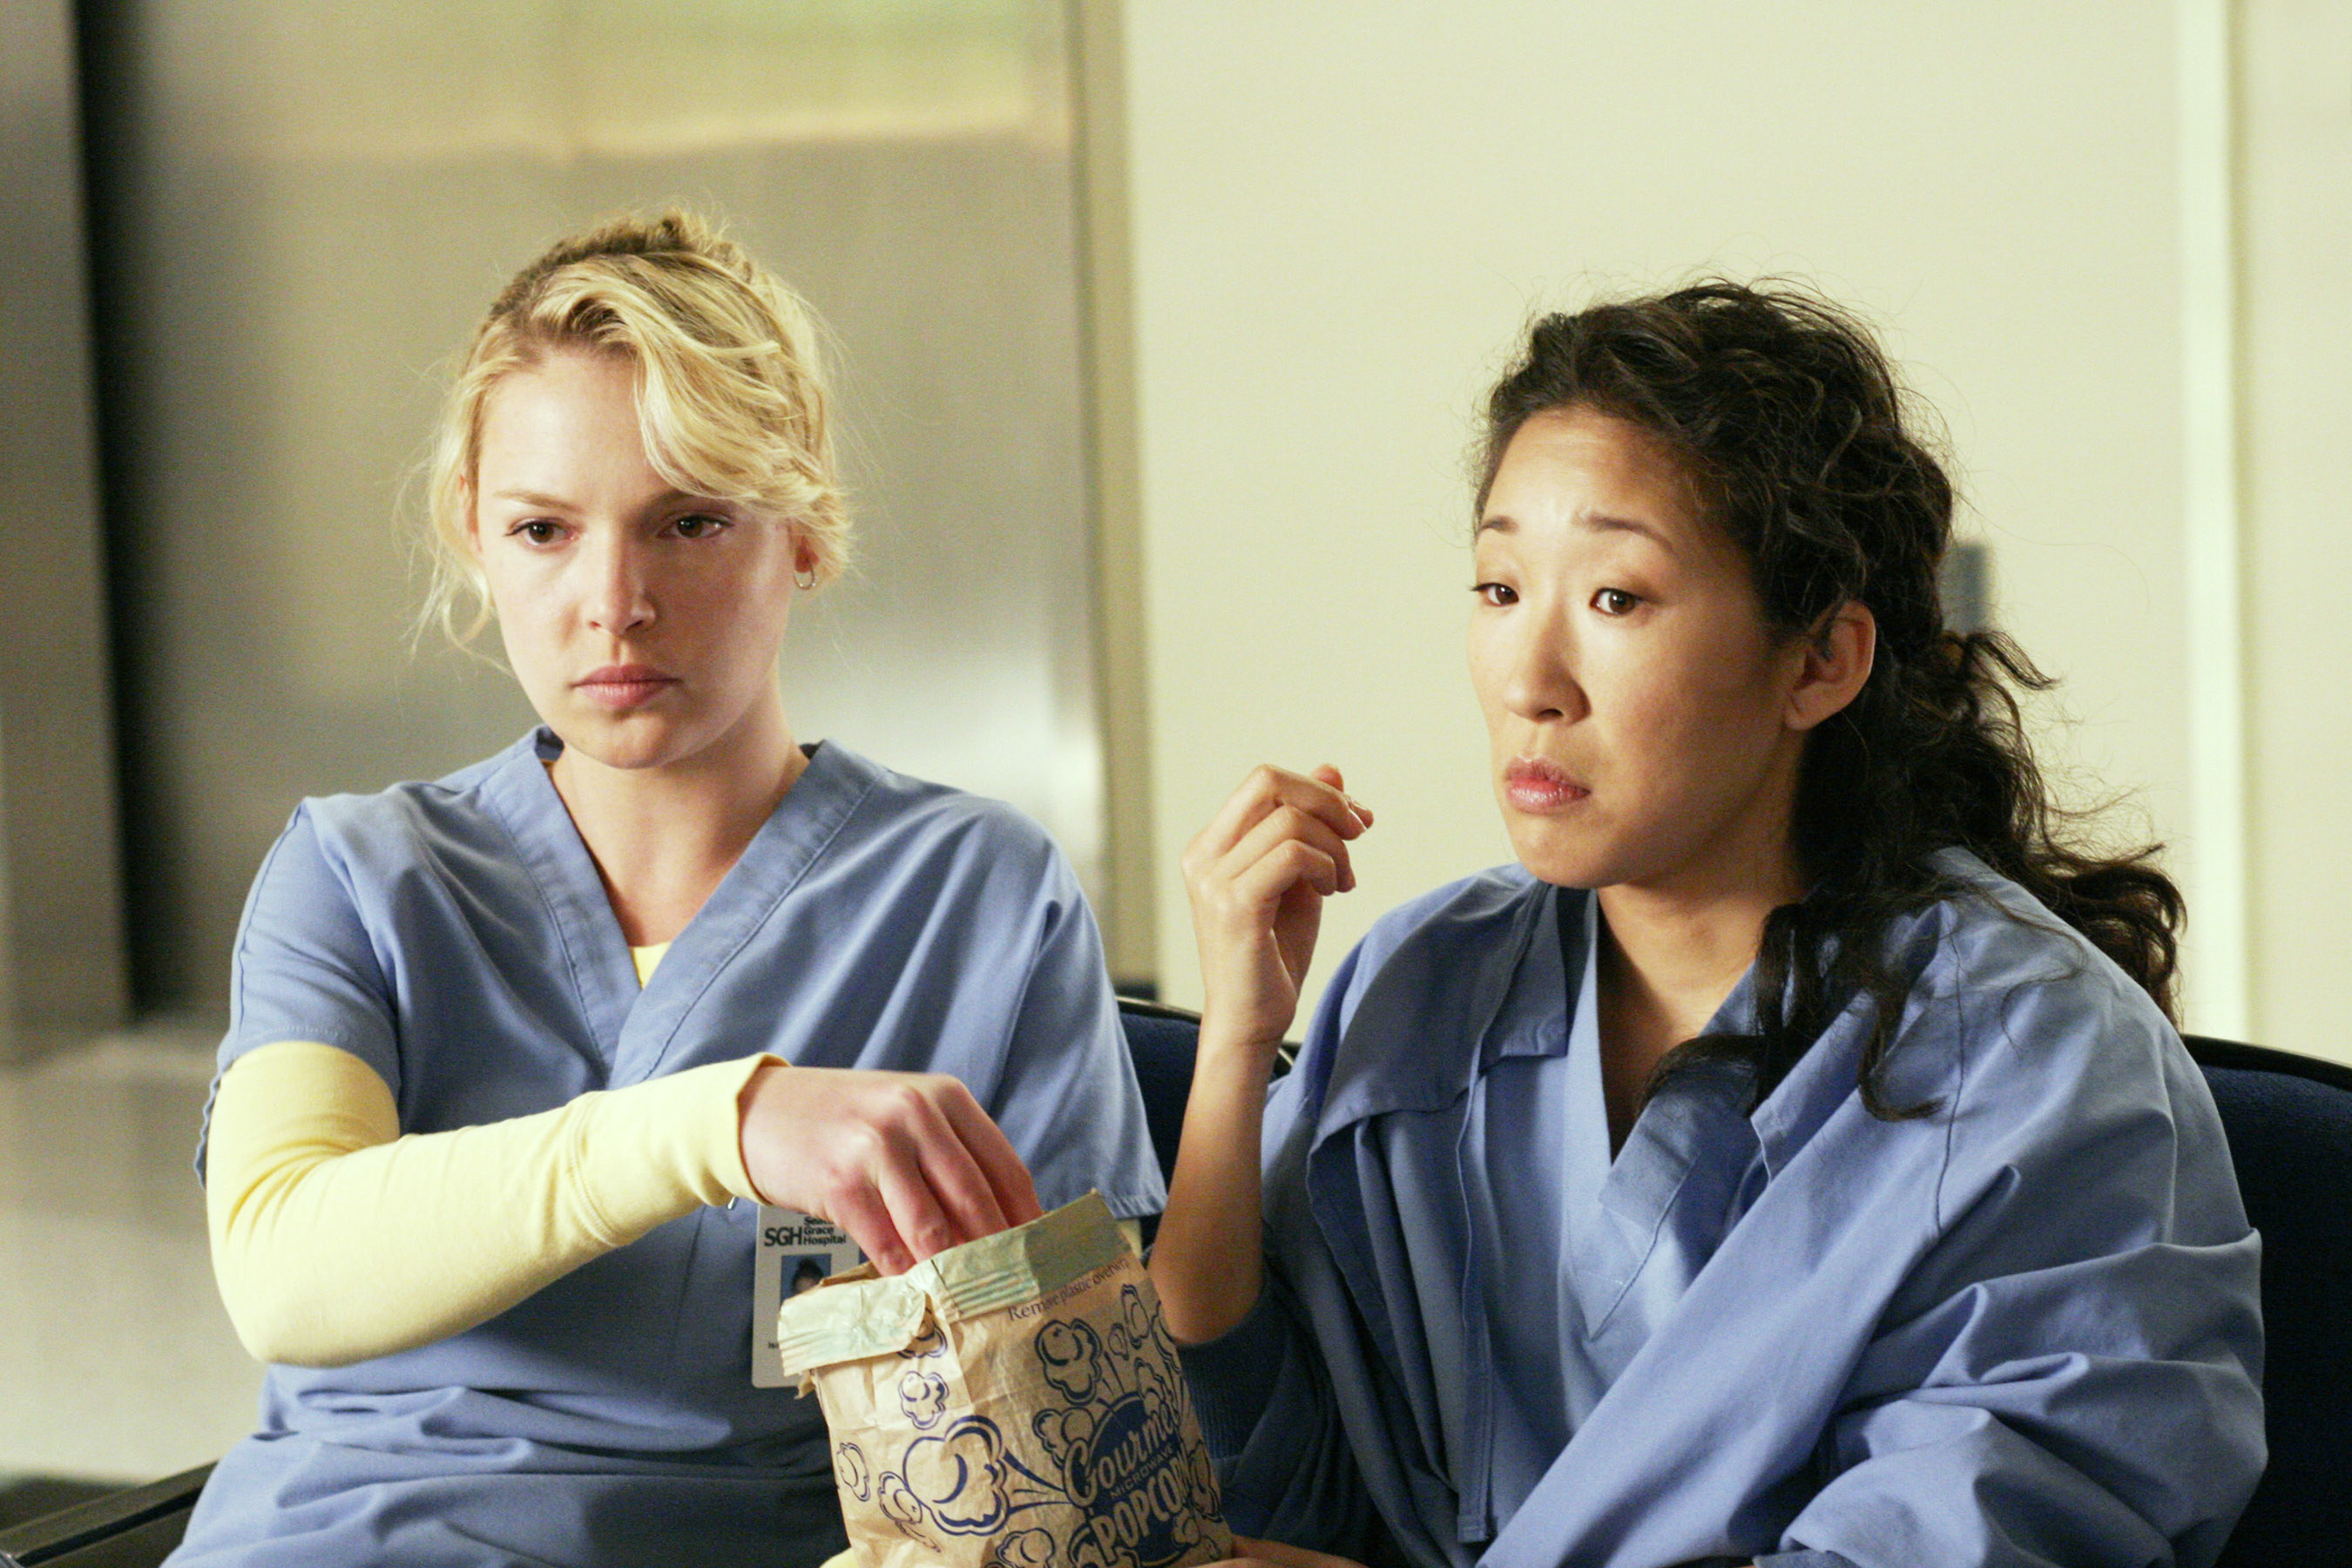 Cristina eats popcorn with another doctor